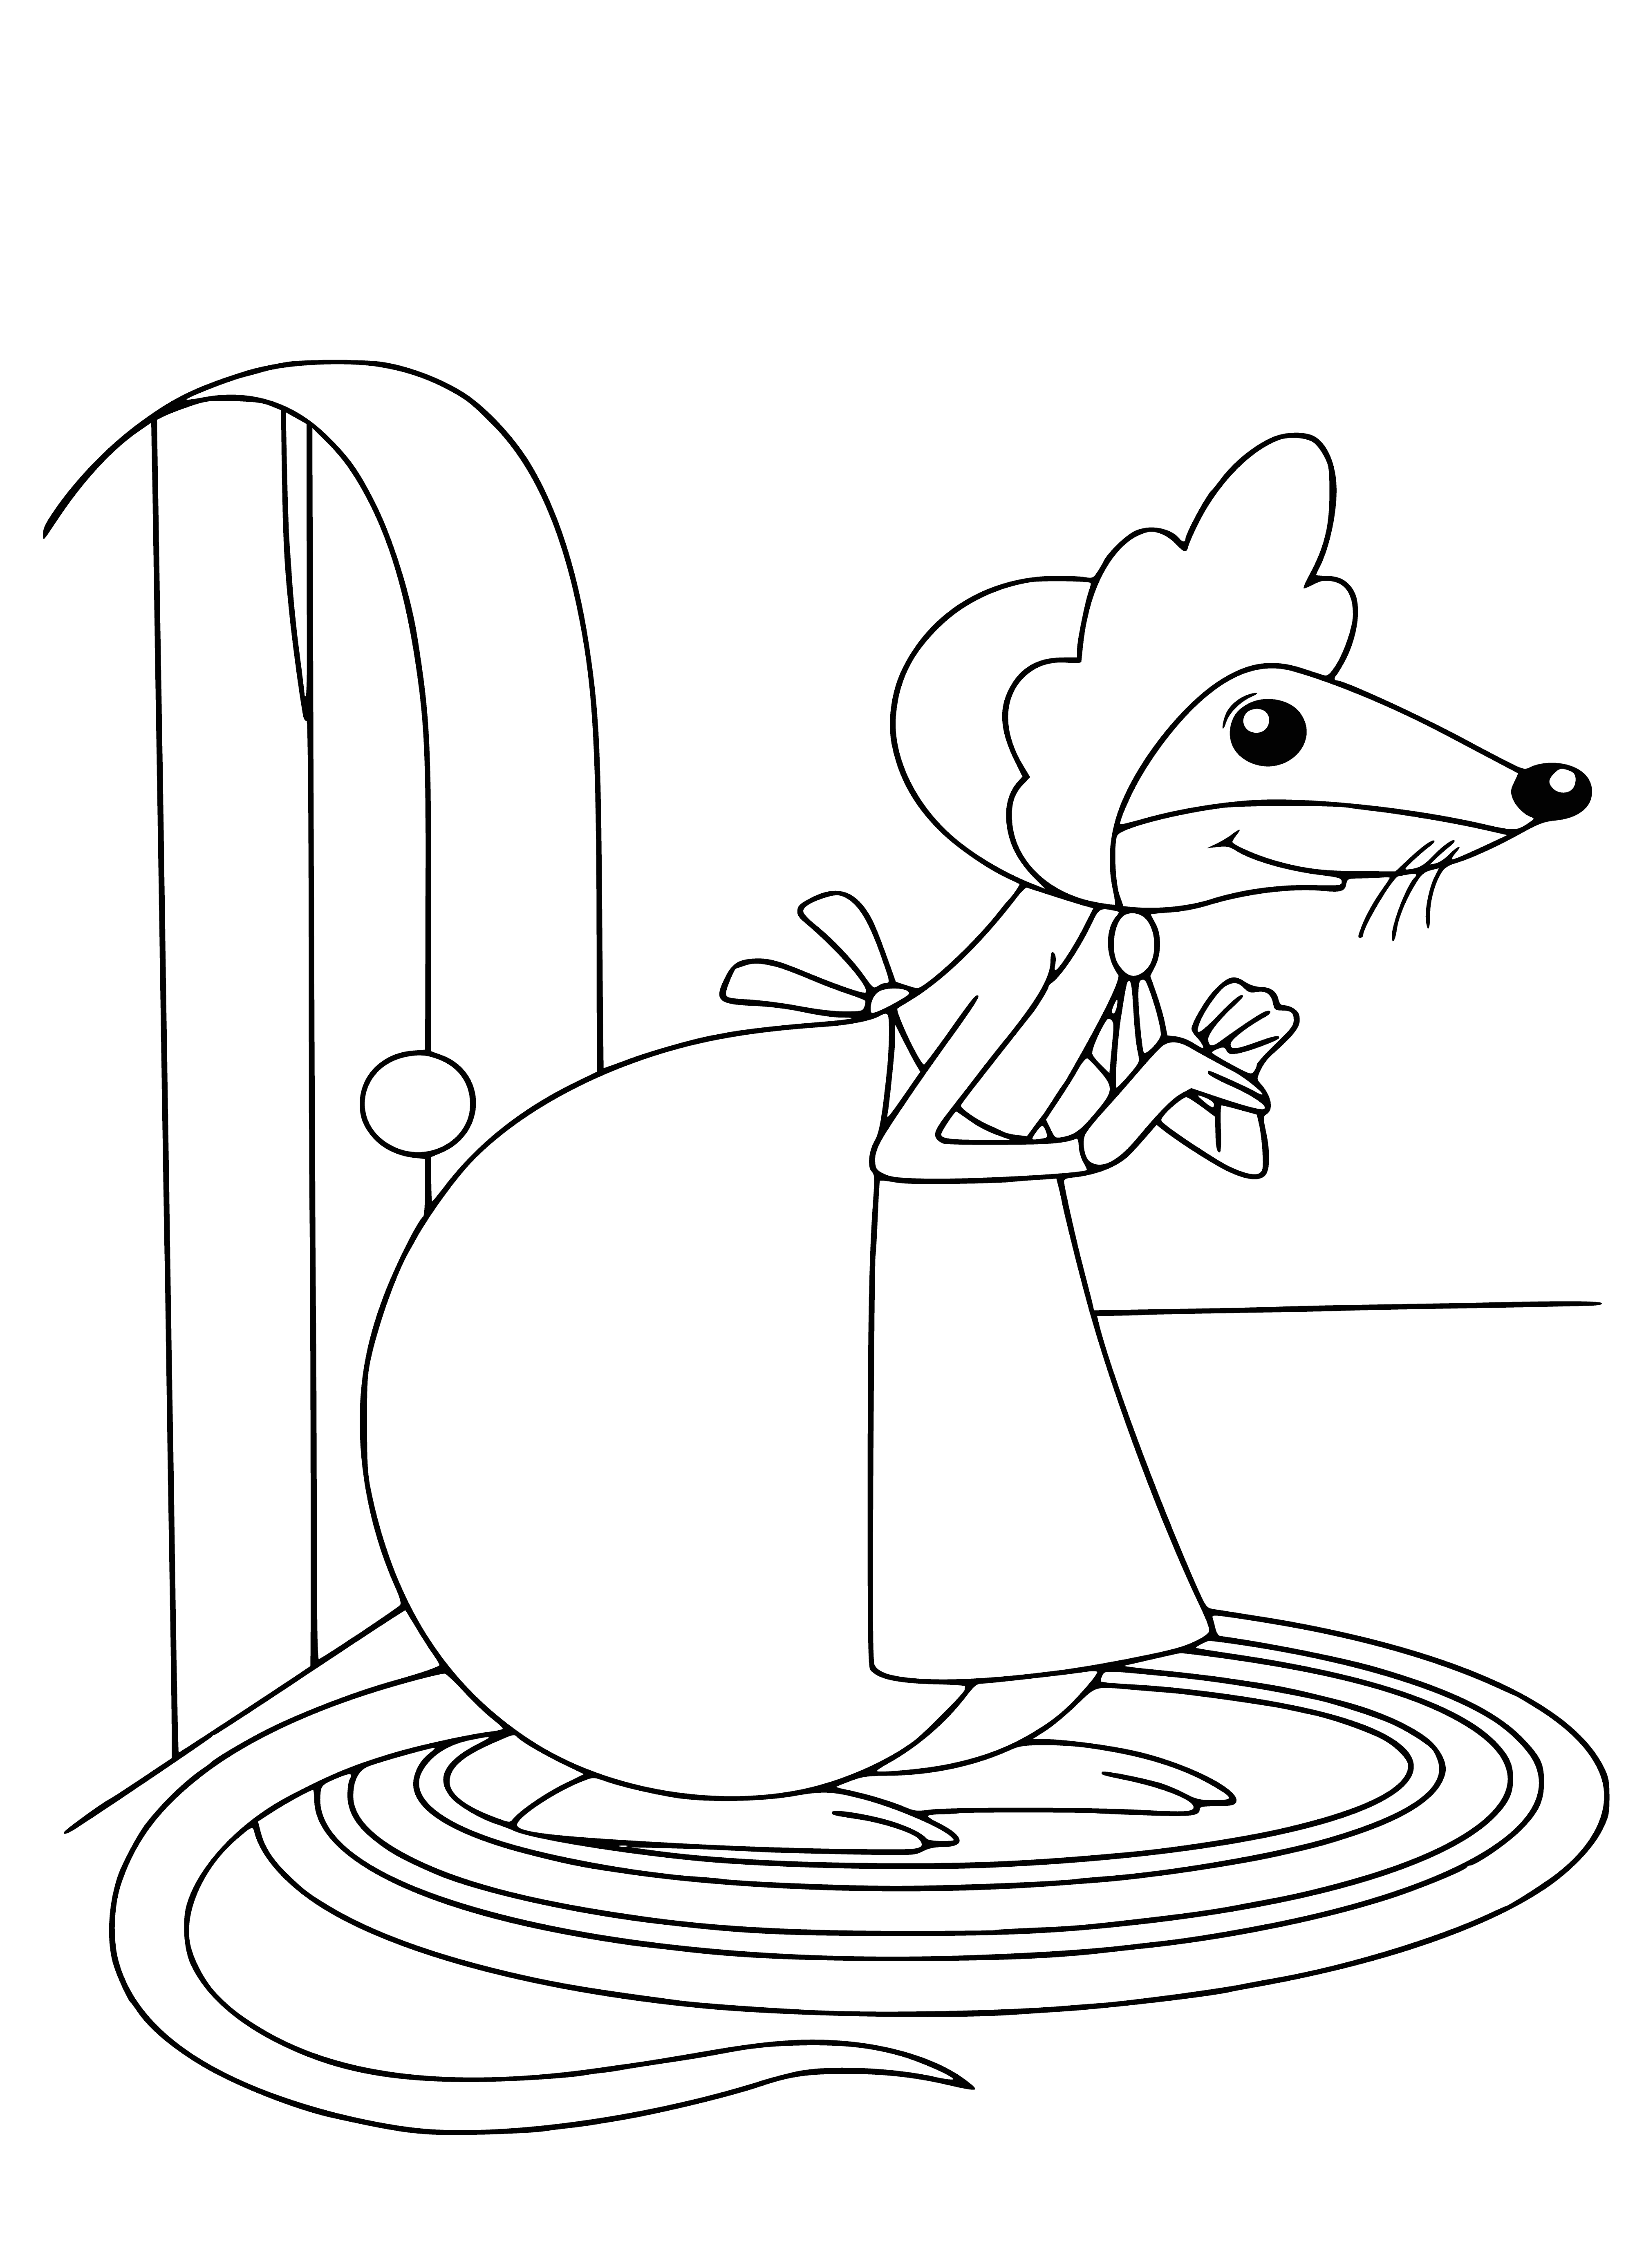 coloring page: Small rodent w/ reddish-brown fur, long tail & large ears. Native to Europe & Asia.